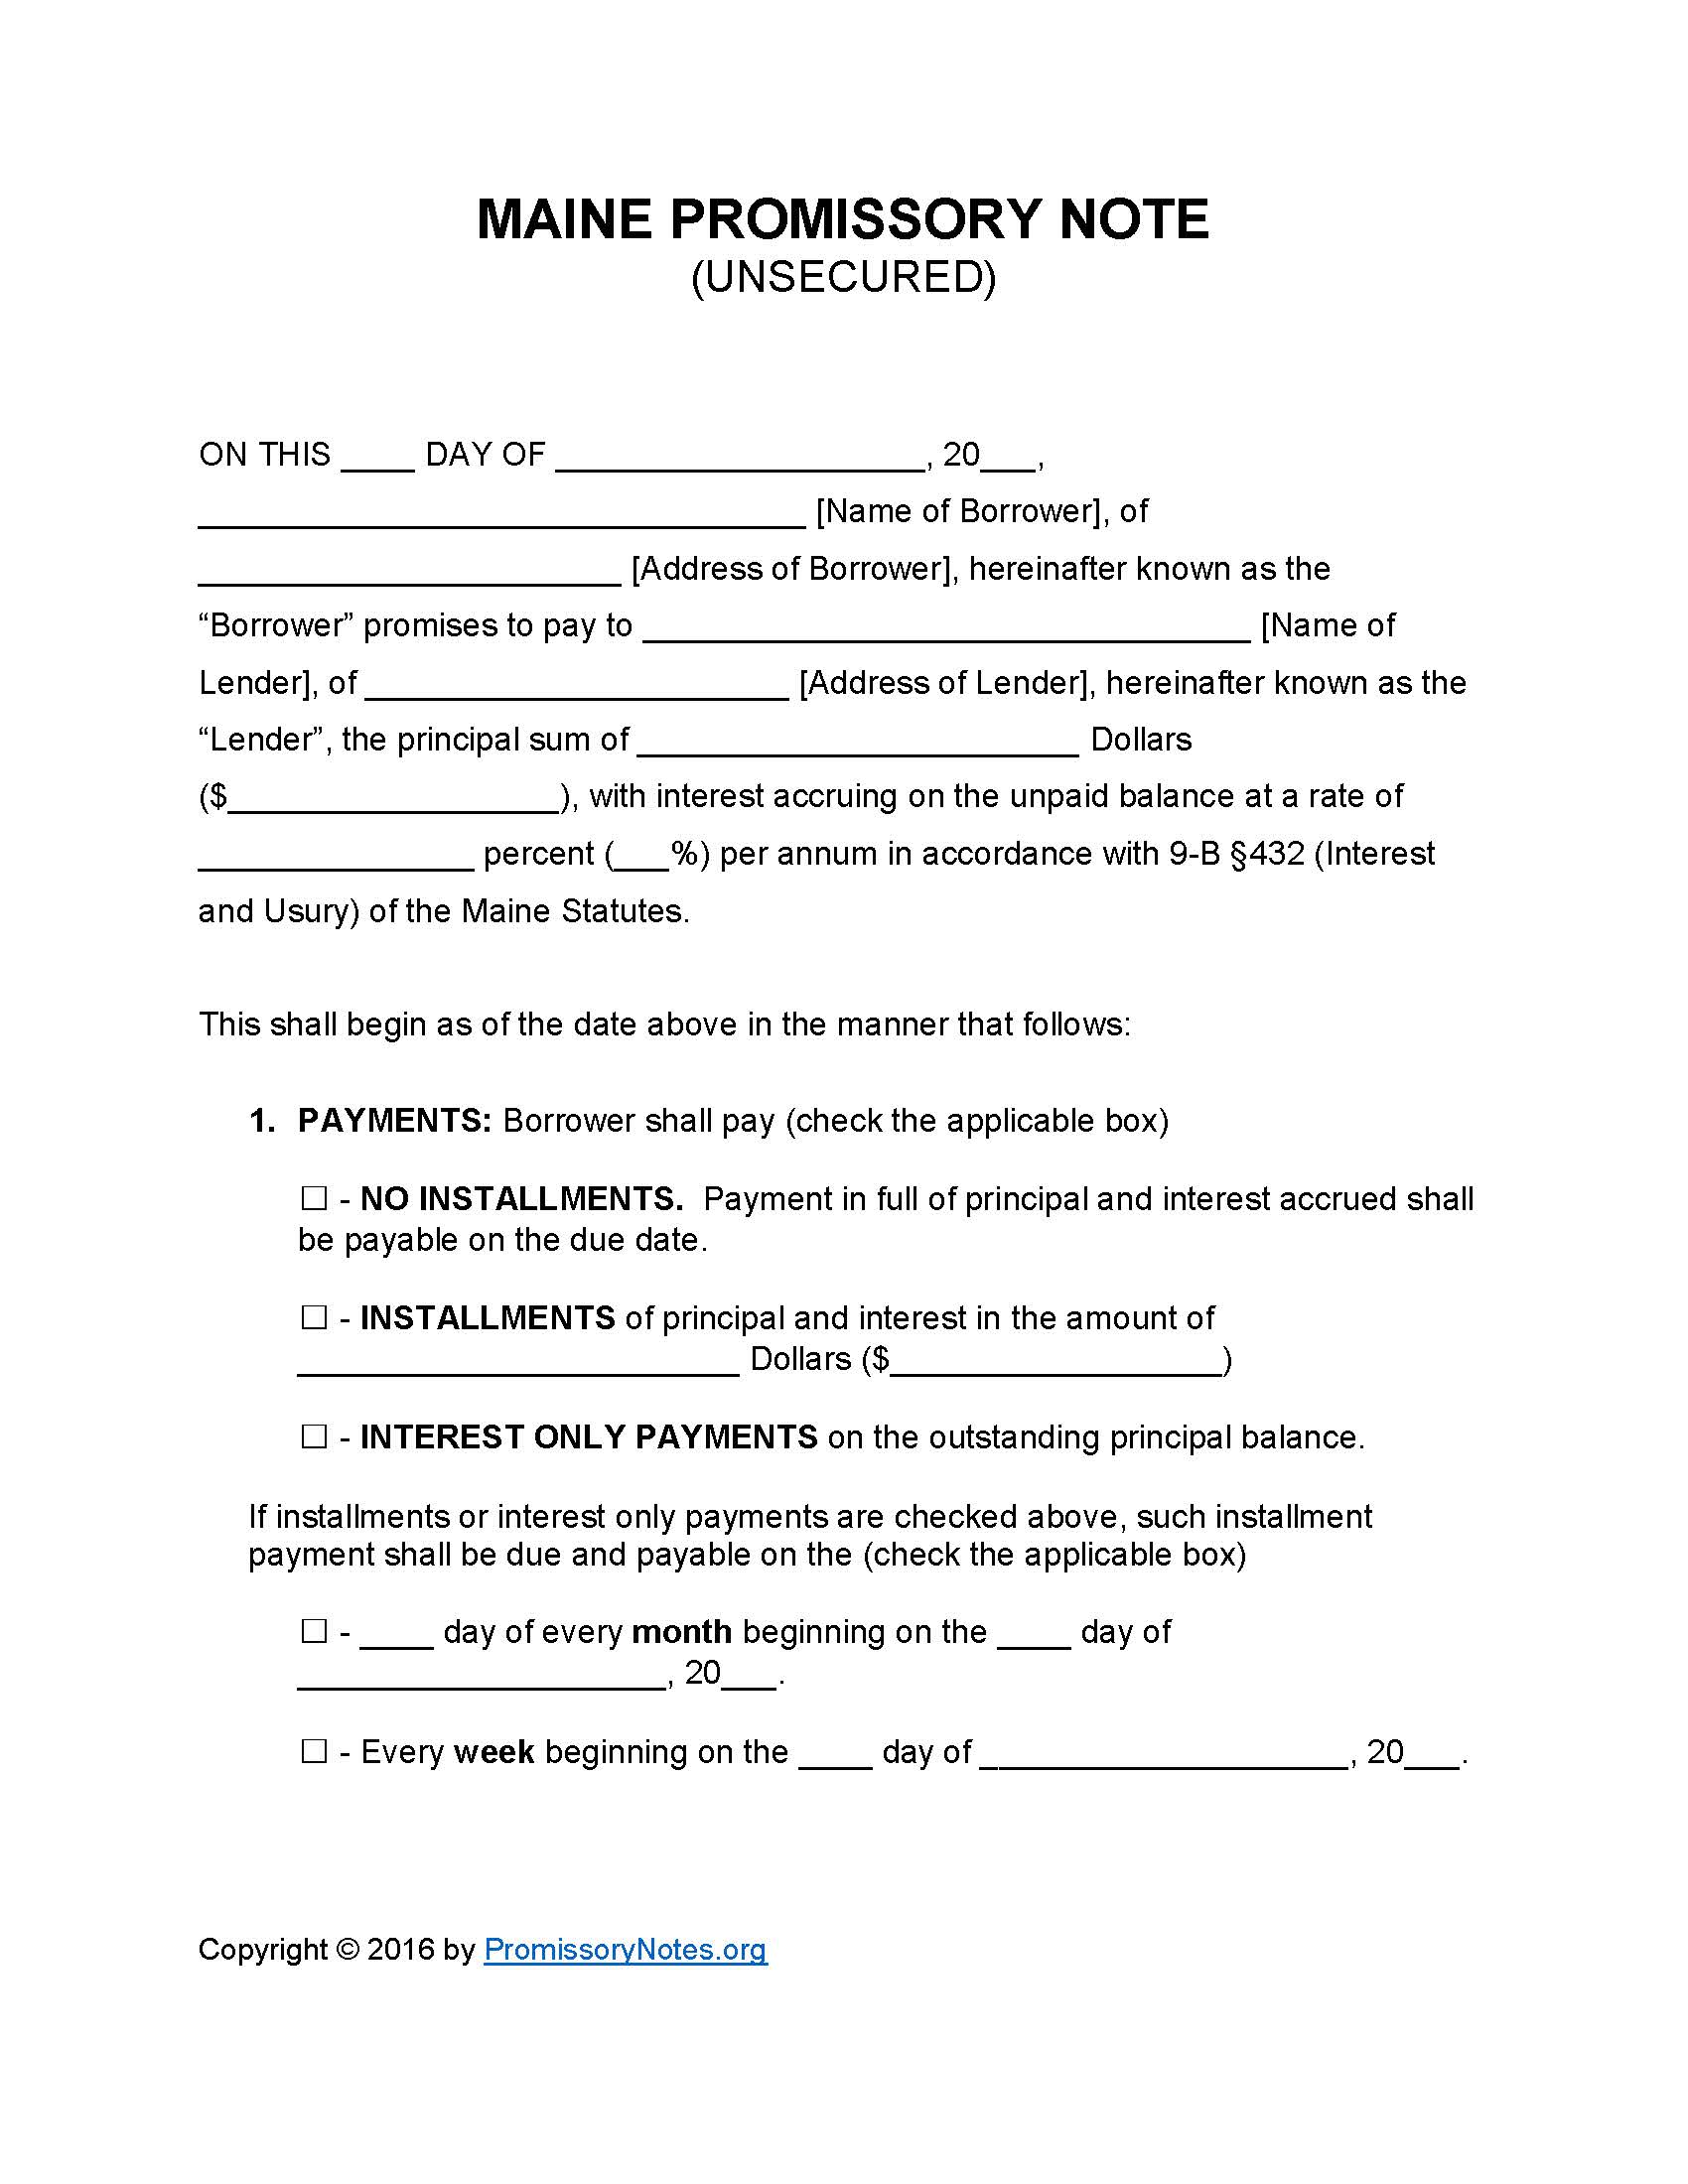 Maine Unsecured Promissory Note Template - Promissory Notes With Regard To free installment loan agreement template